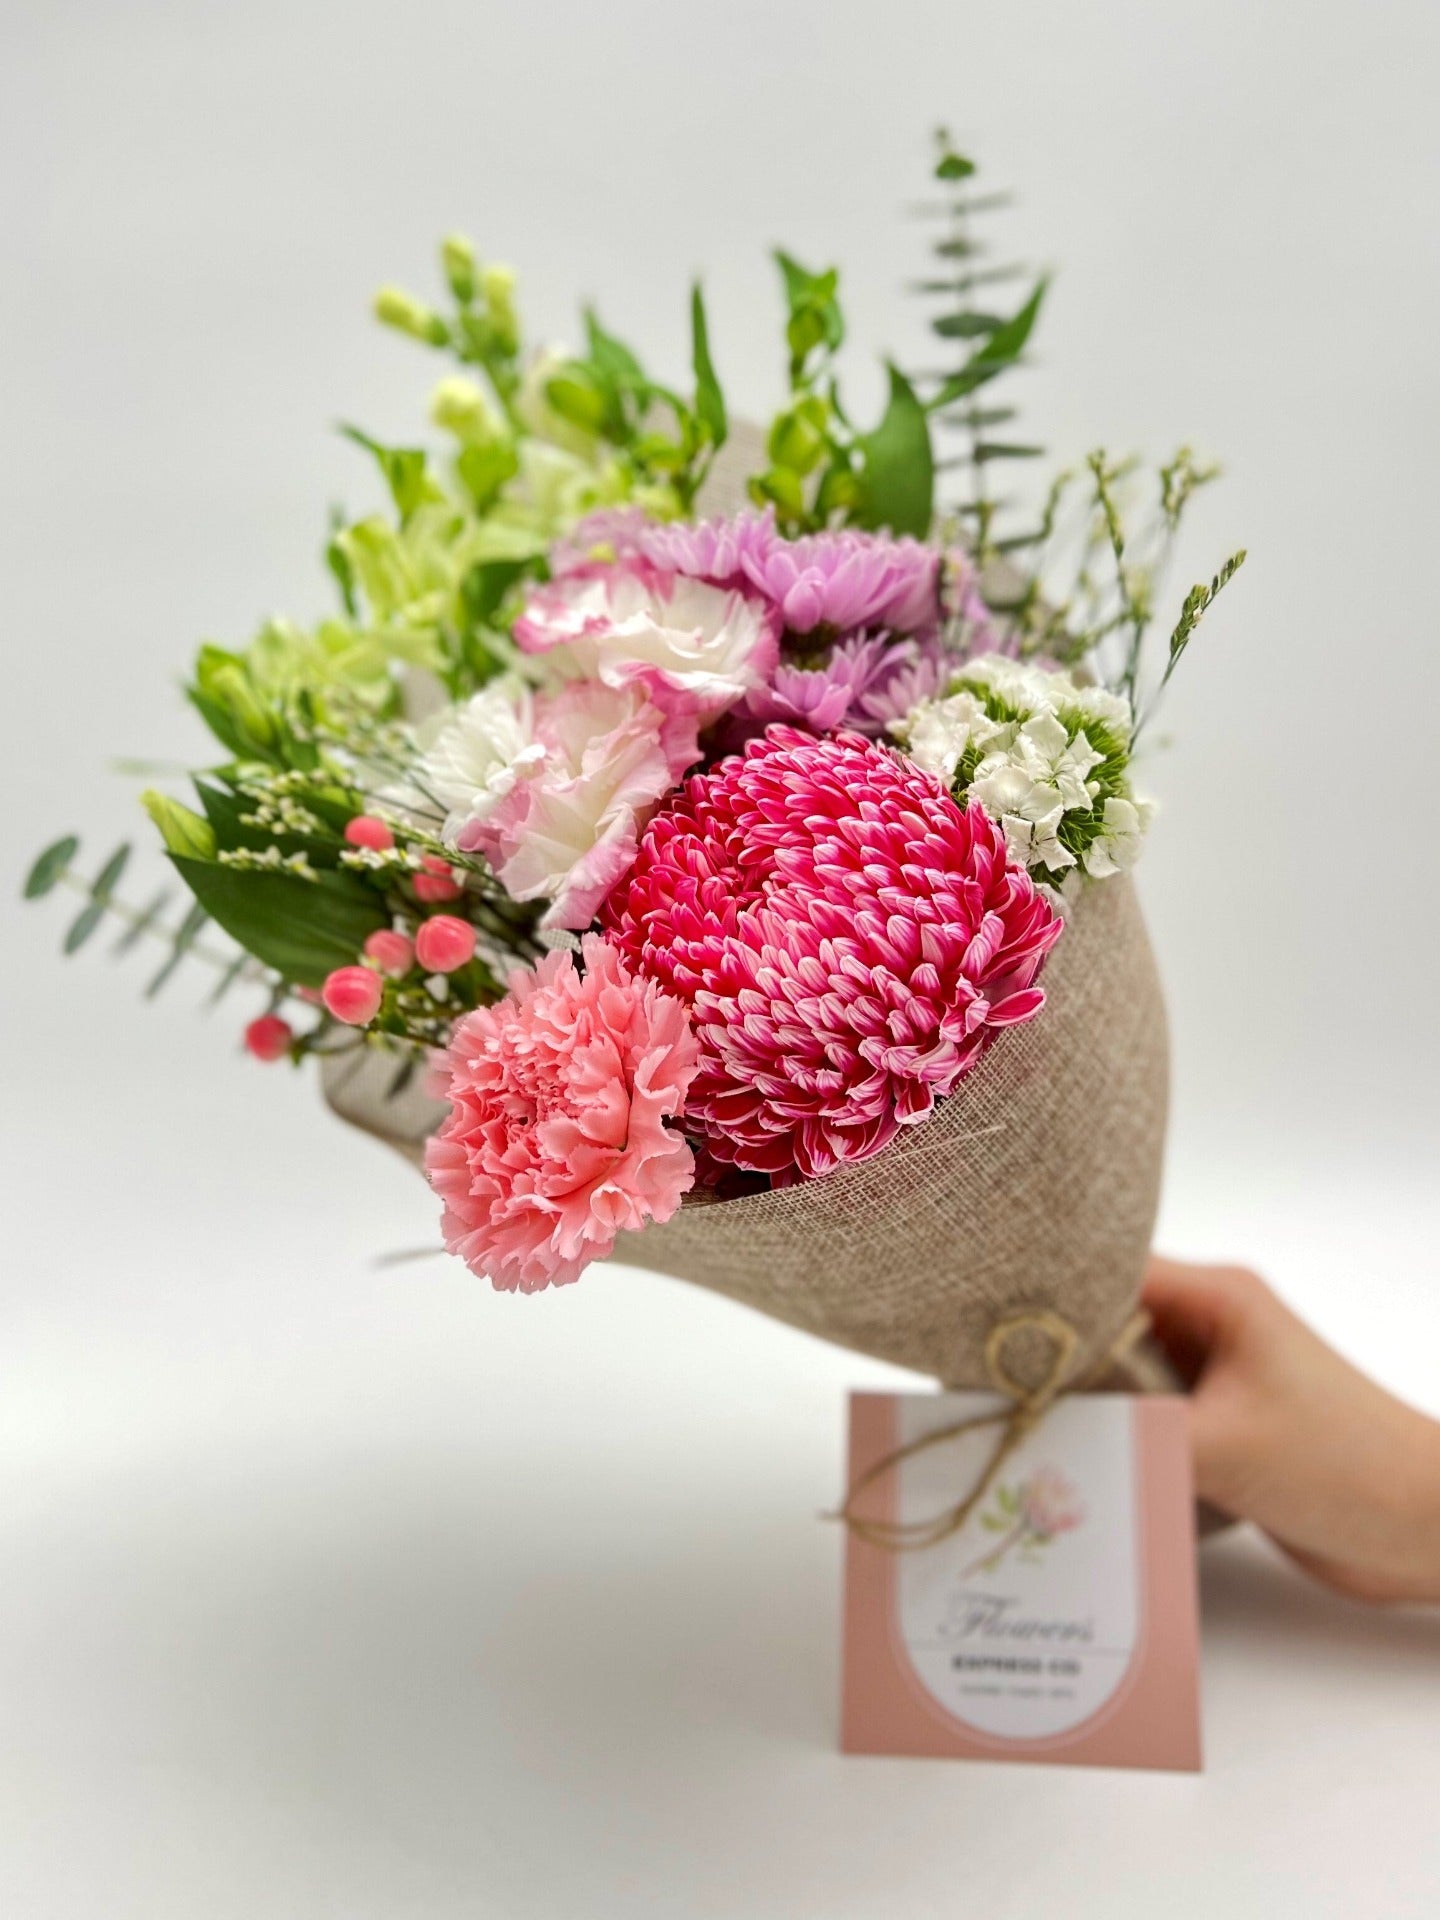 A handmade bouquet of pink disbuds mum, carnations, and other pink or white flowers handcrafted in Melbourne held by a florist from Flowers Express Co. 